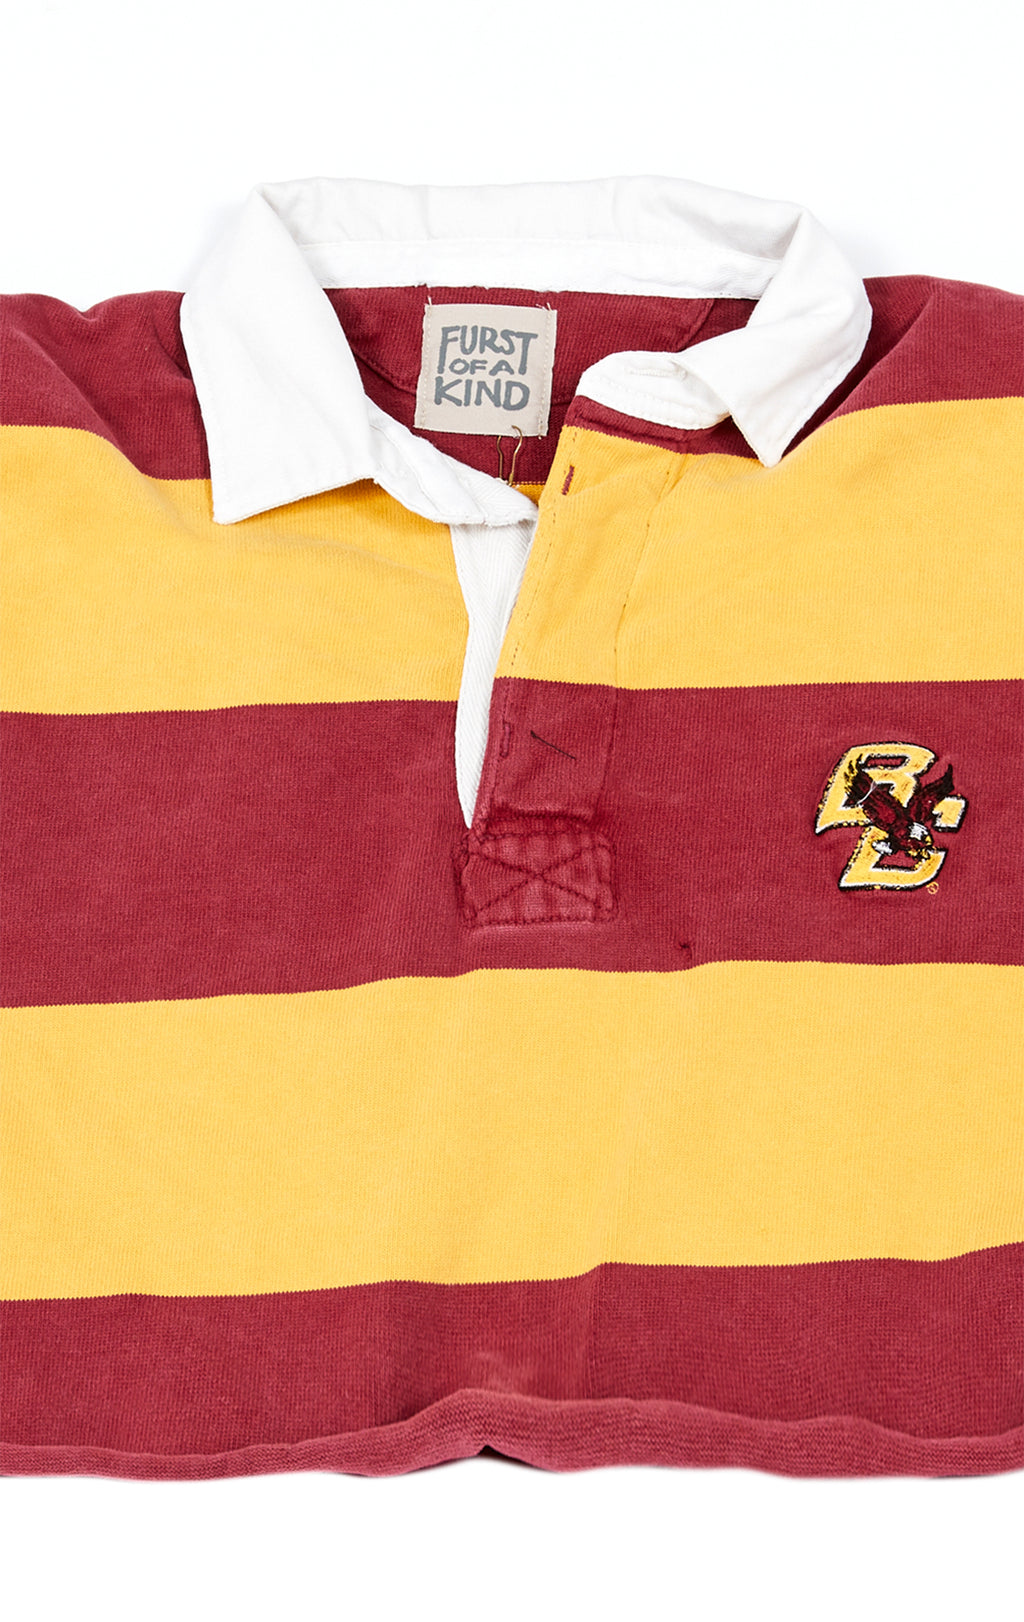 vintage polo crop rugby shirt